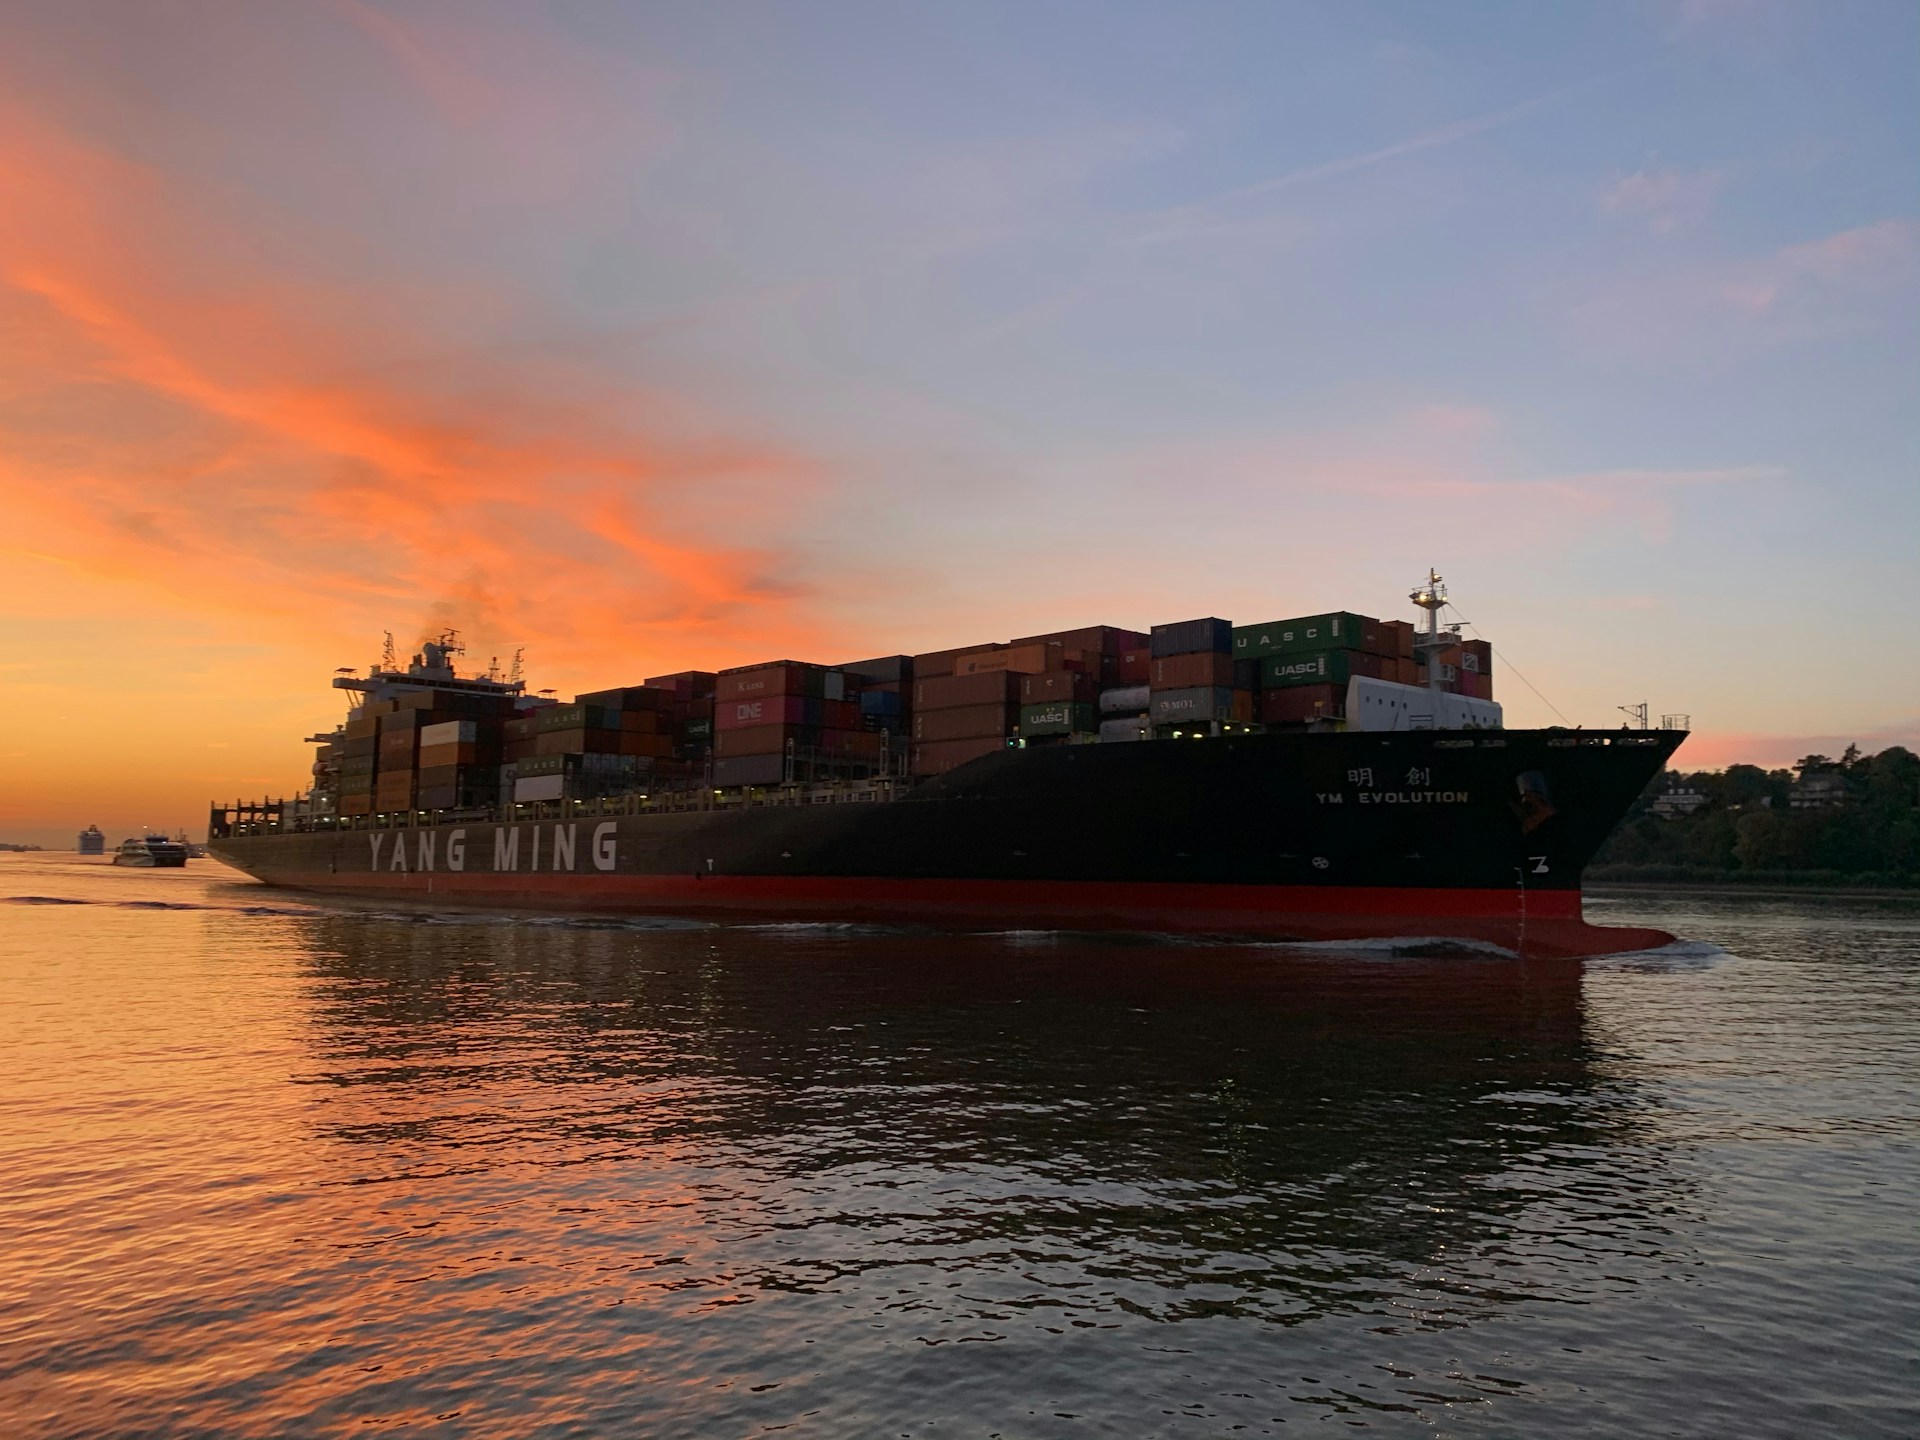 A Yang Ming container ship at sunset